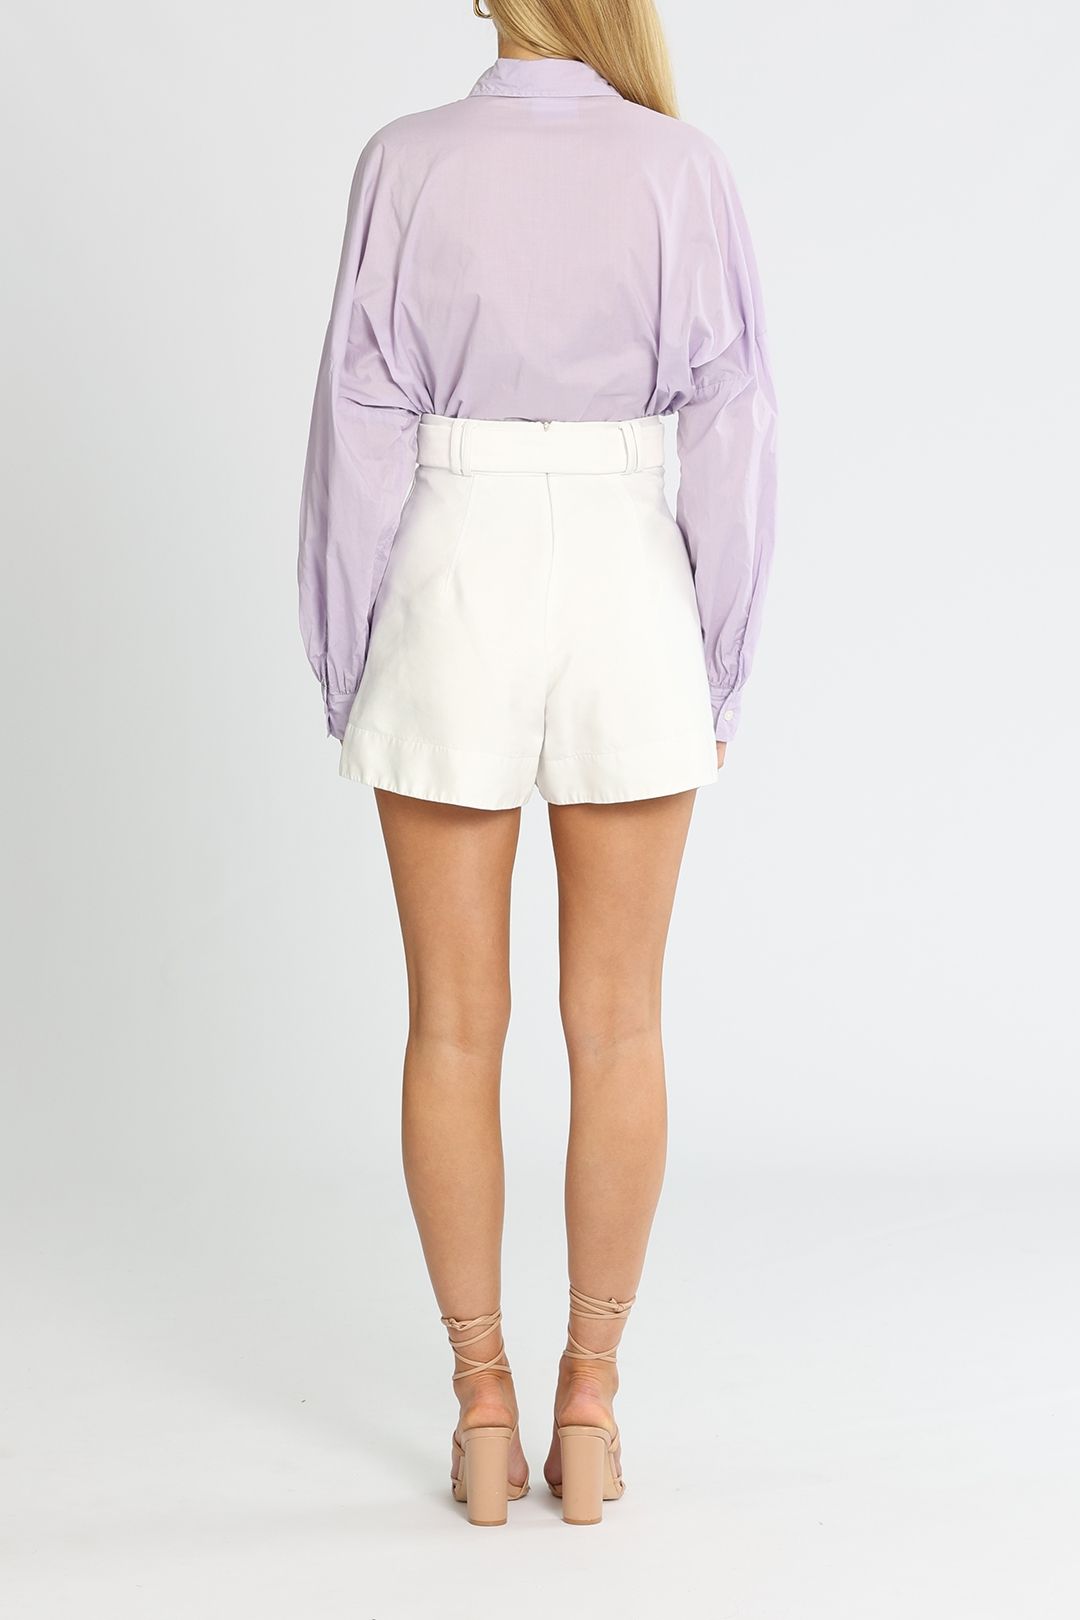 Lmnd Amelia Shirt Lilac Relaxed Fit